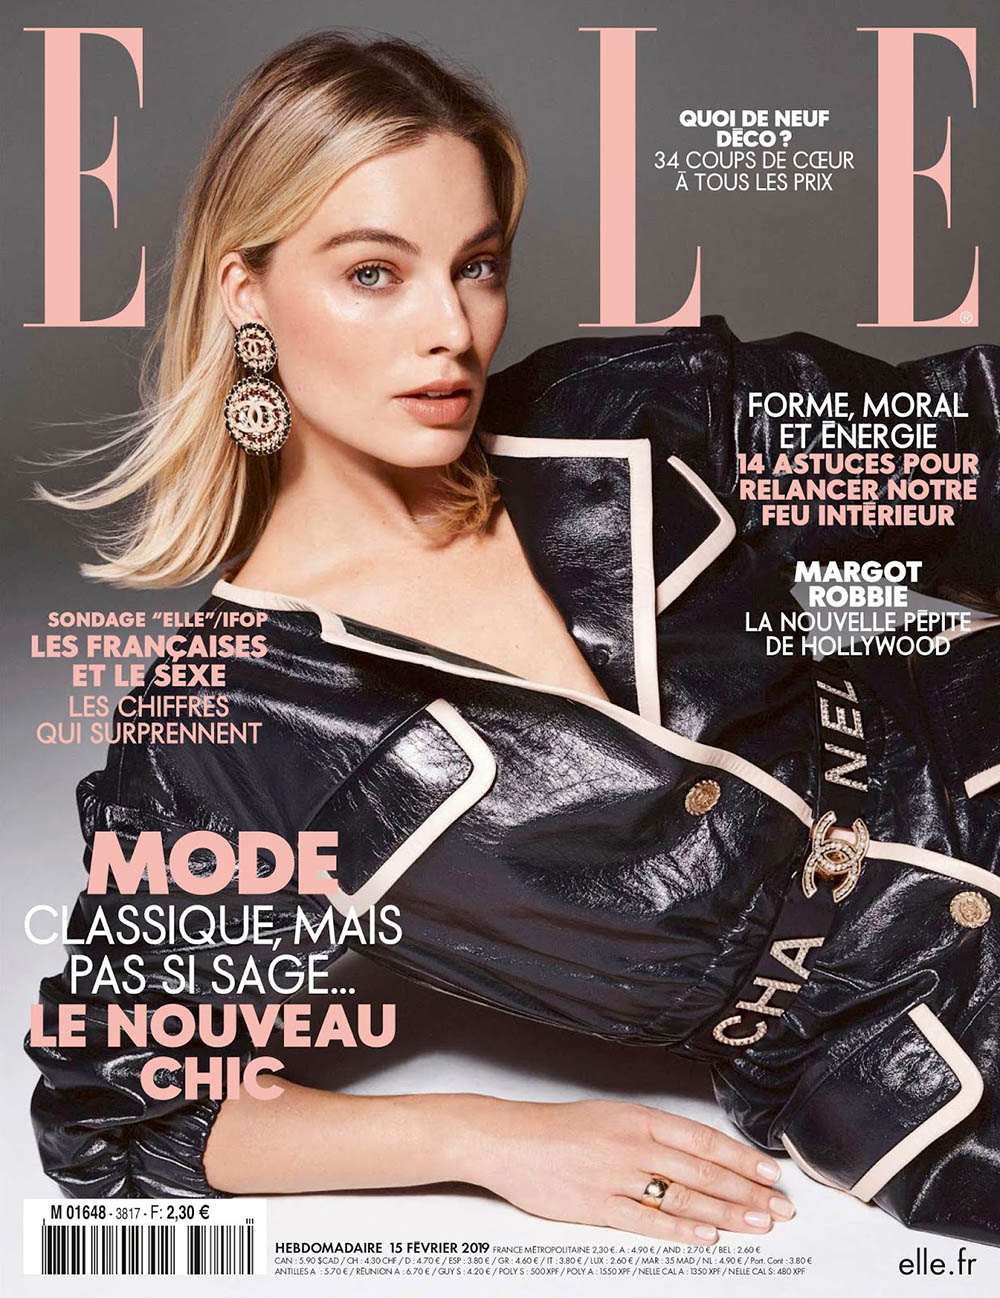 Margot Robbie covers Elle France February 15th, 2019 by Liz Collins